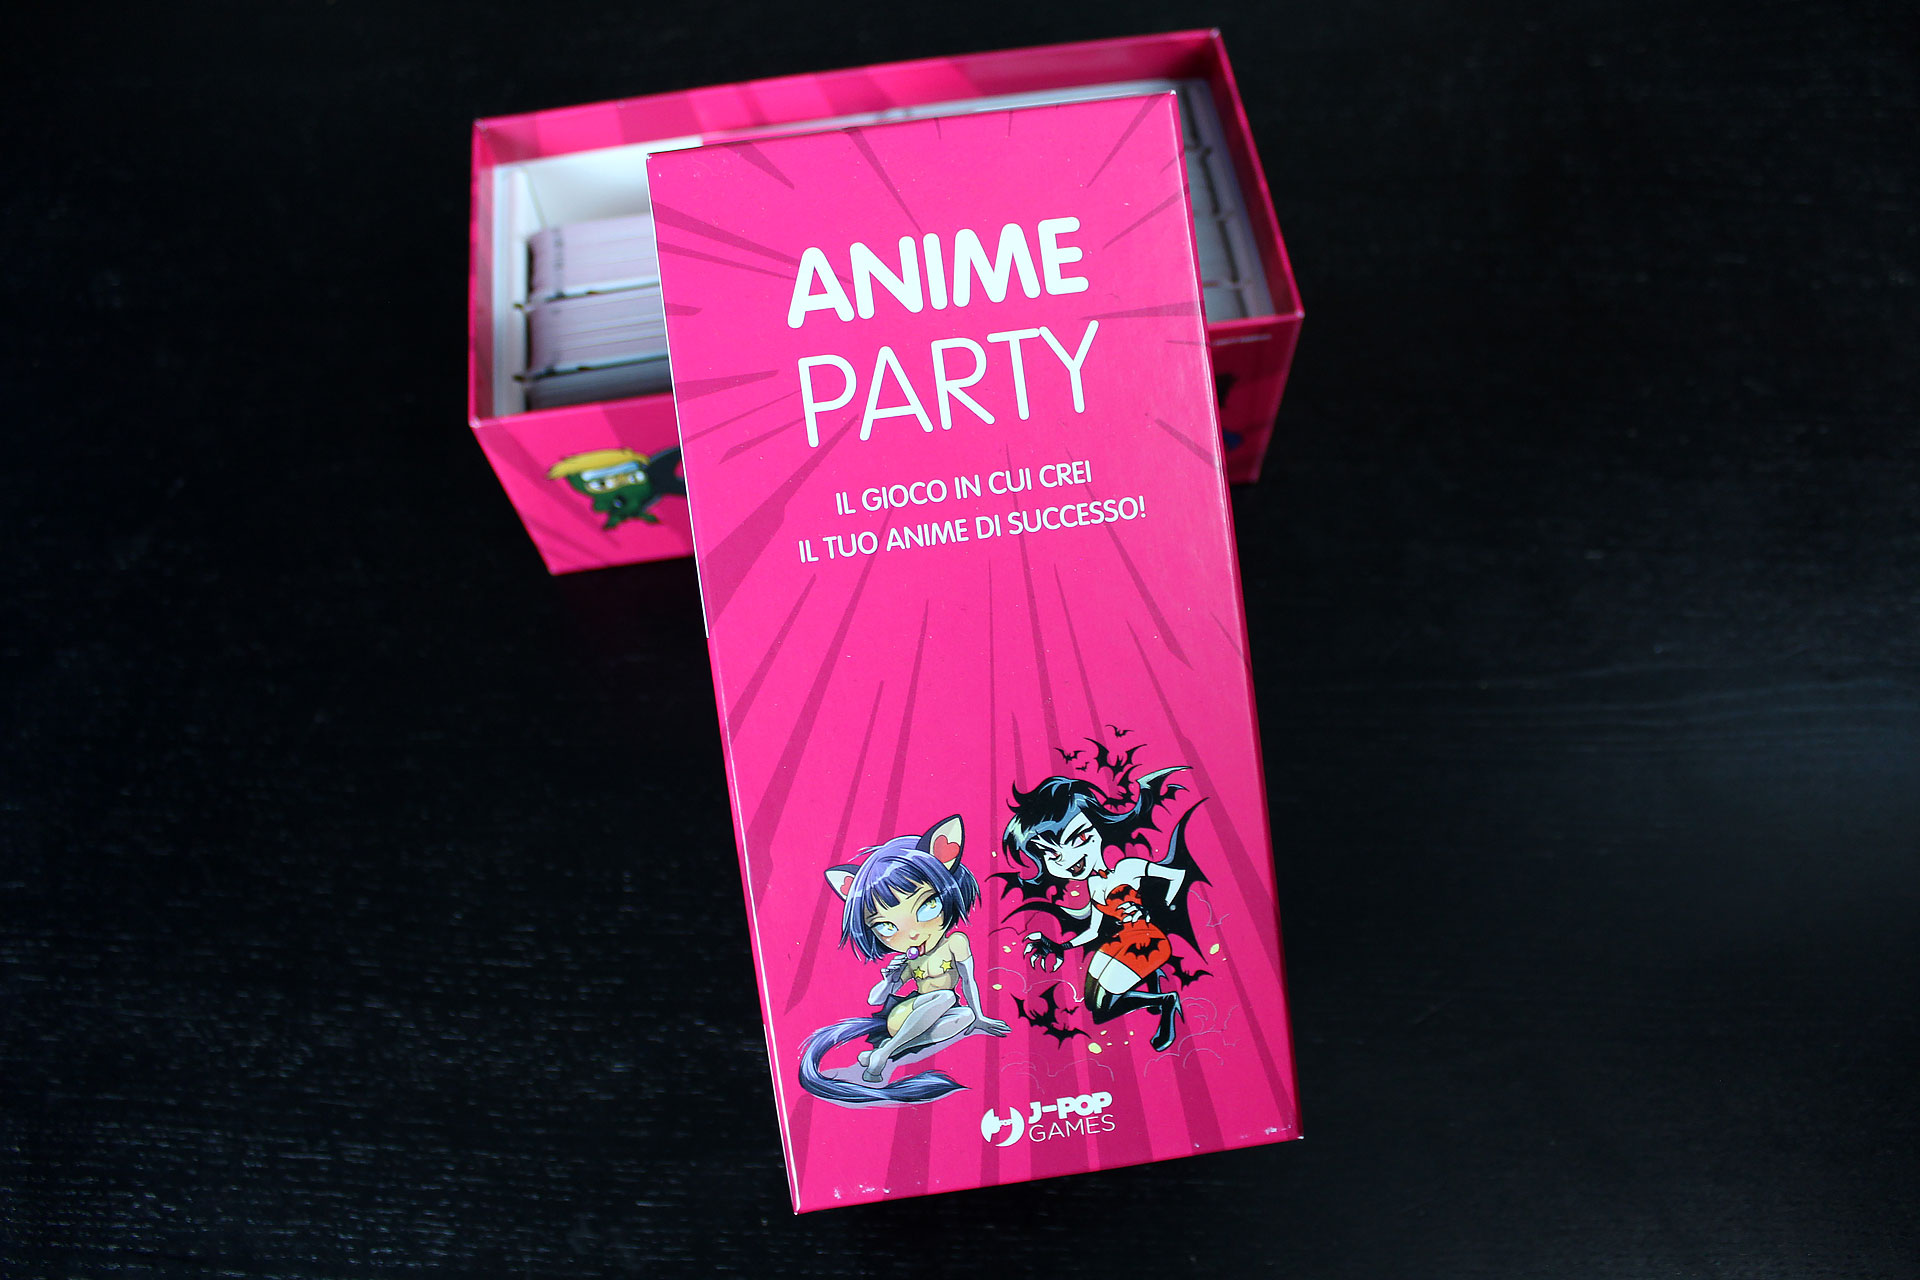 ANIME PARTY